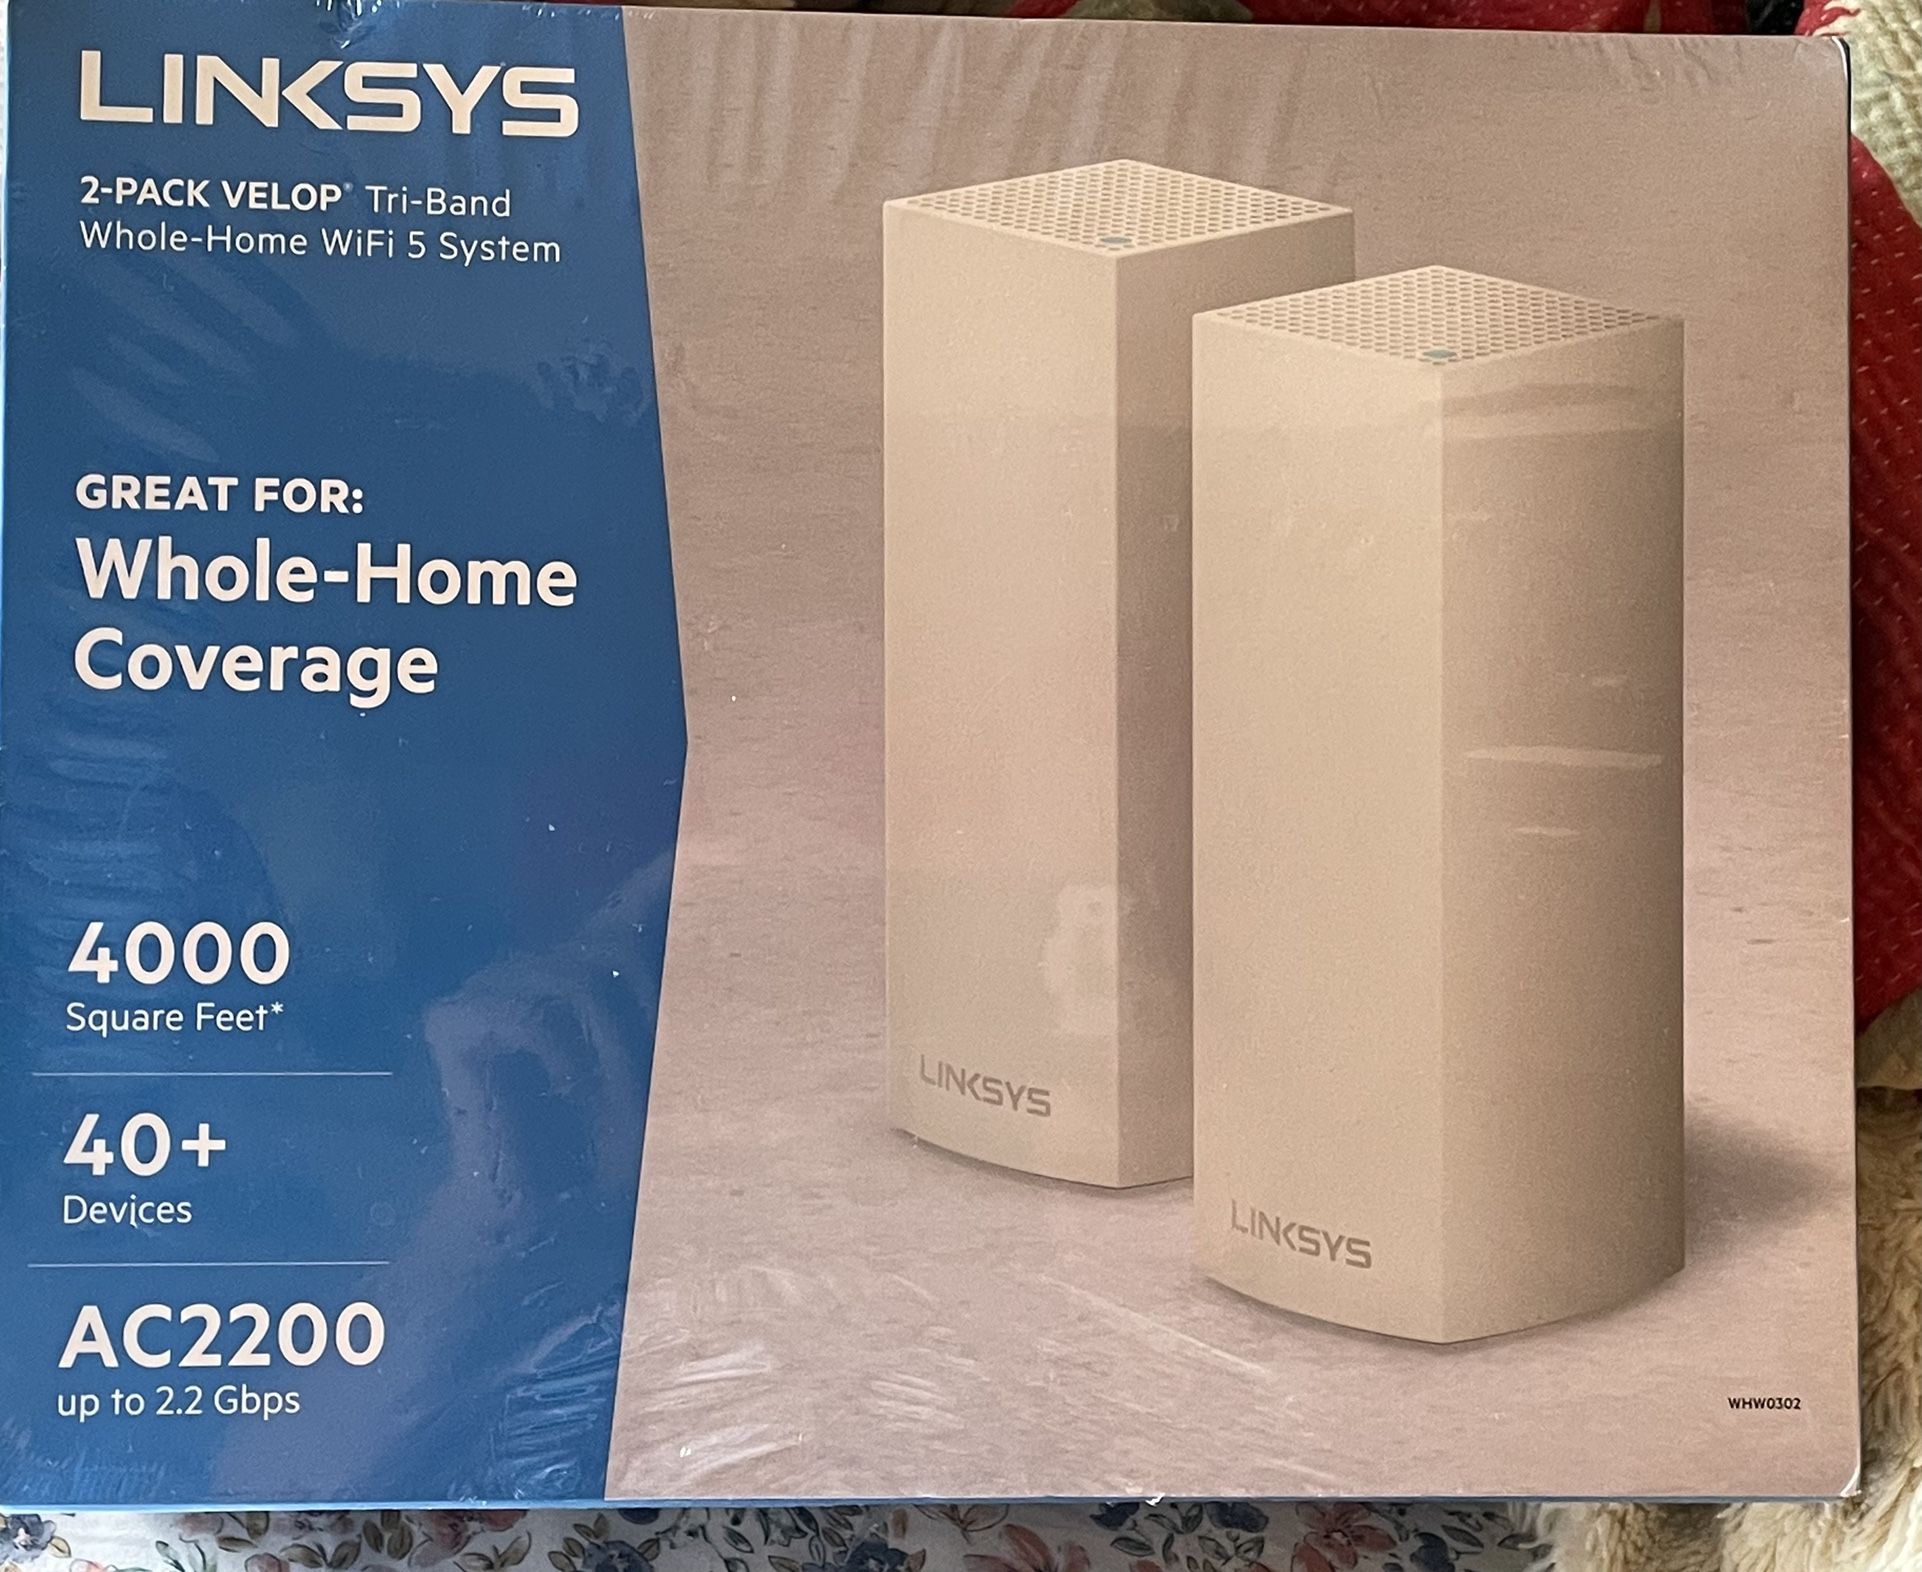 Linley’s 2-pack Below Tru-band Whole House WiFi 5 System